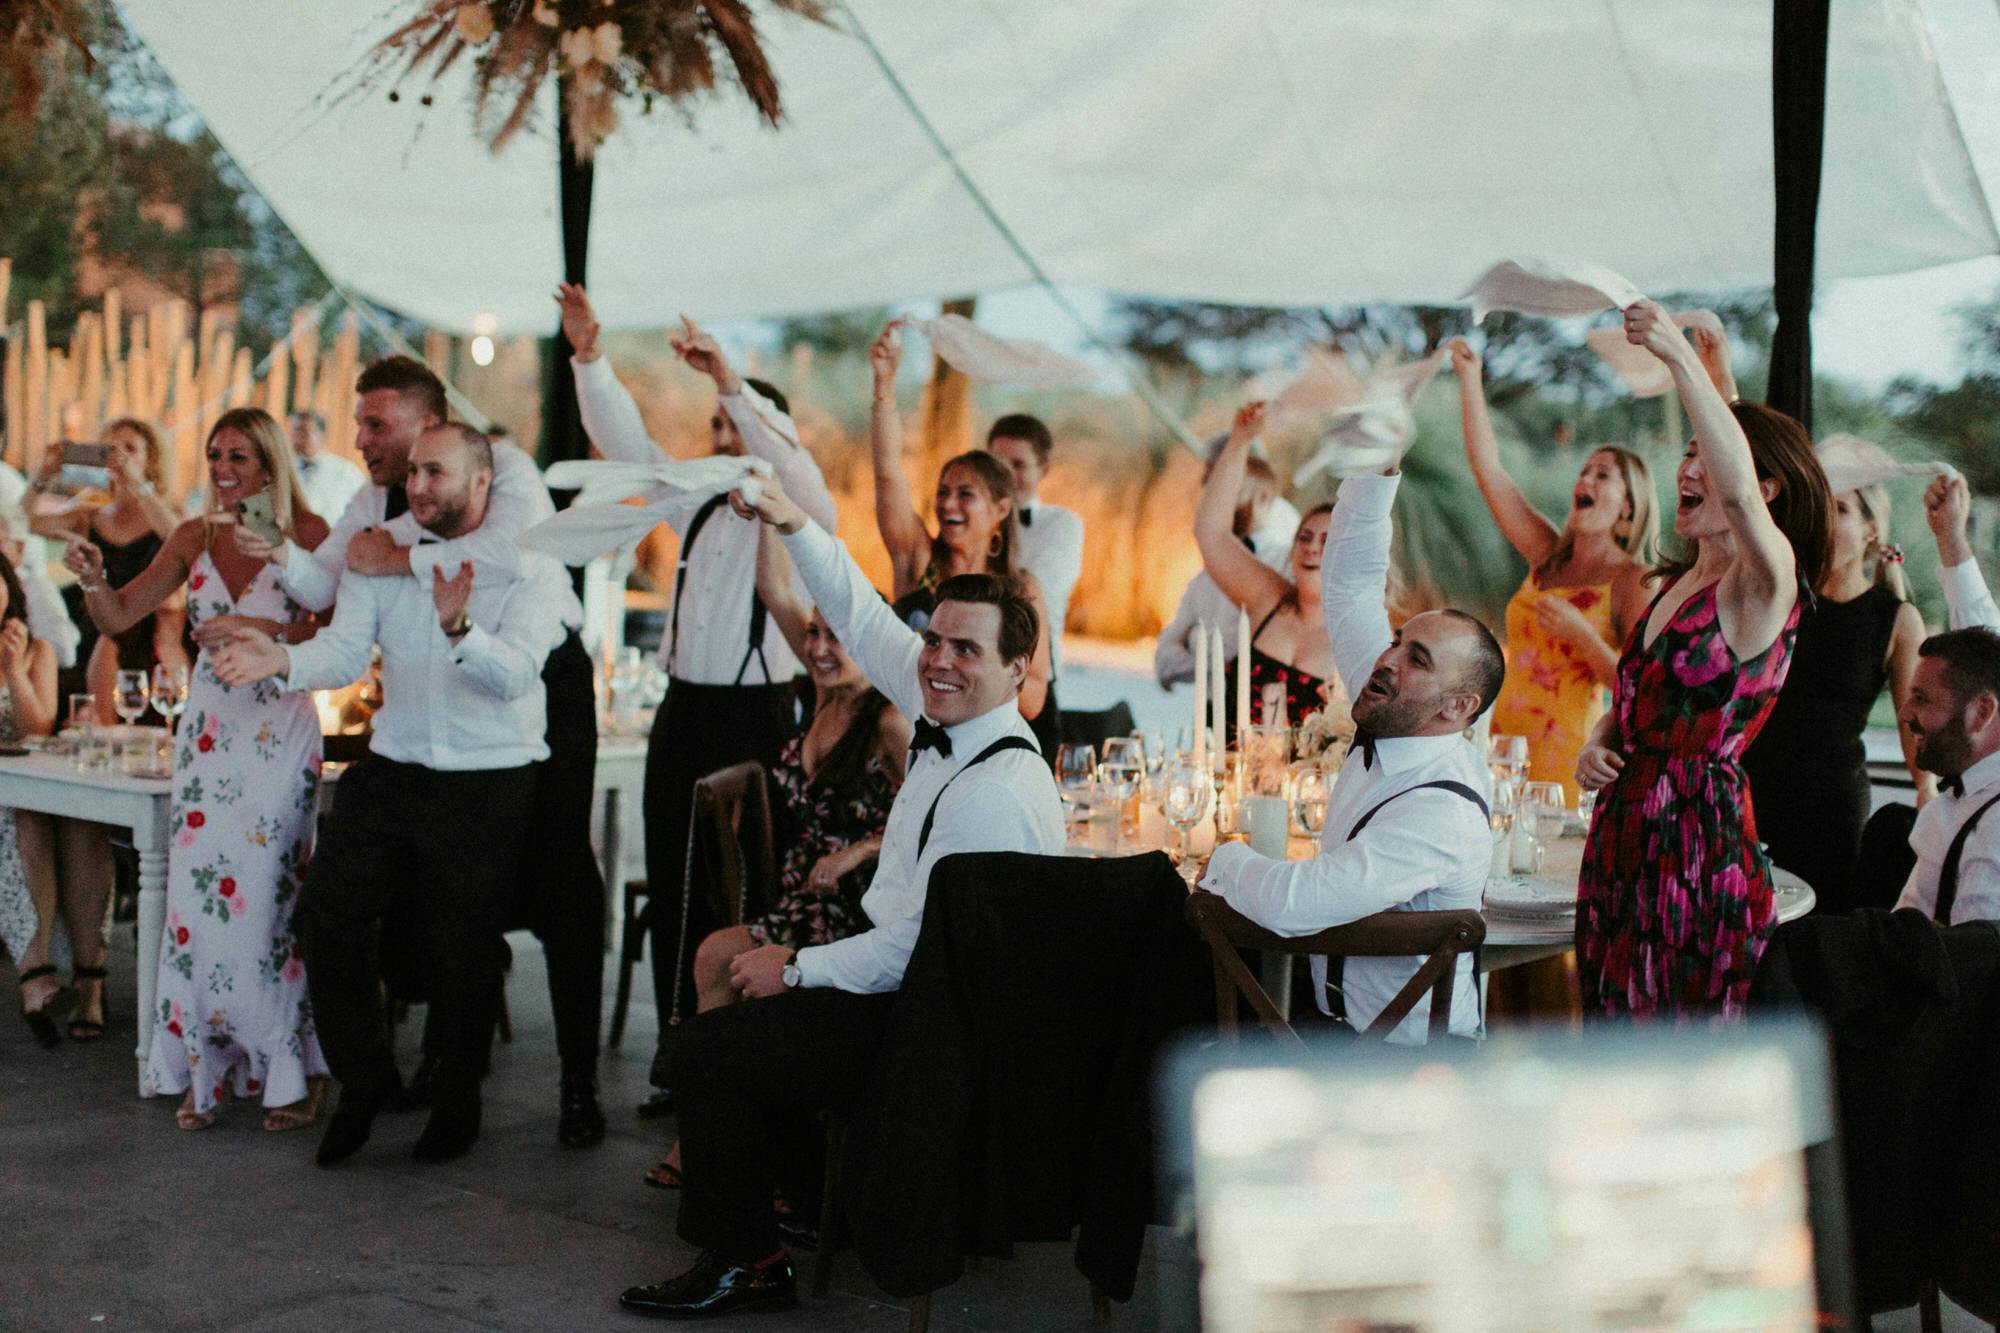 candid photojournalistic shots of guests cheering